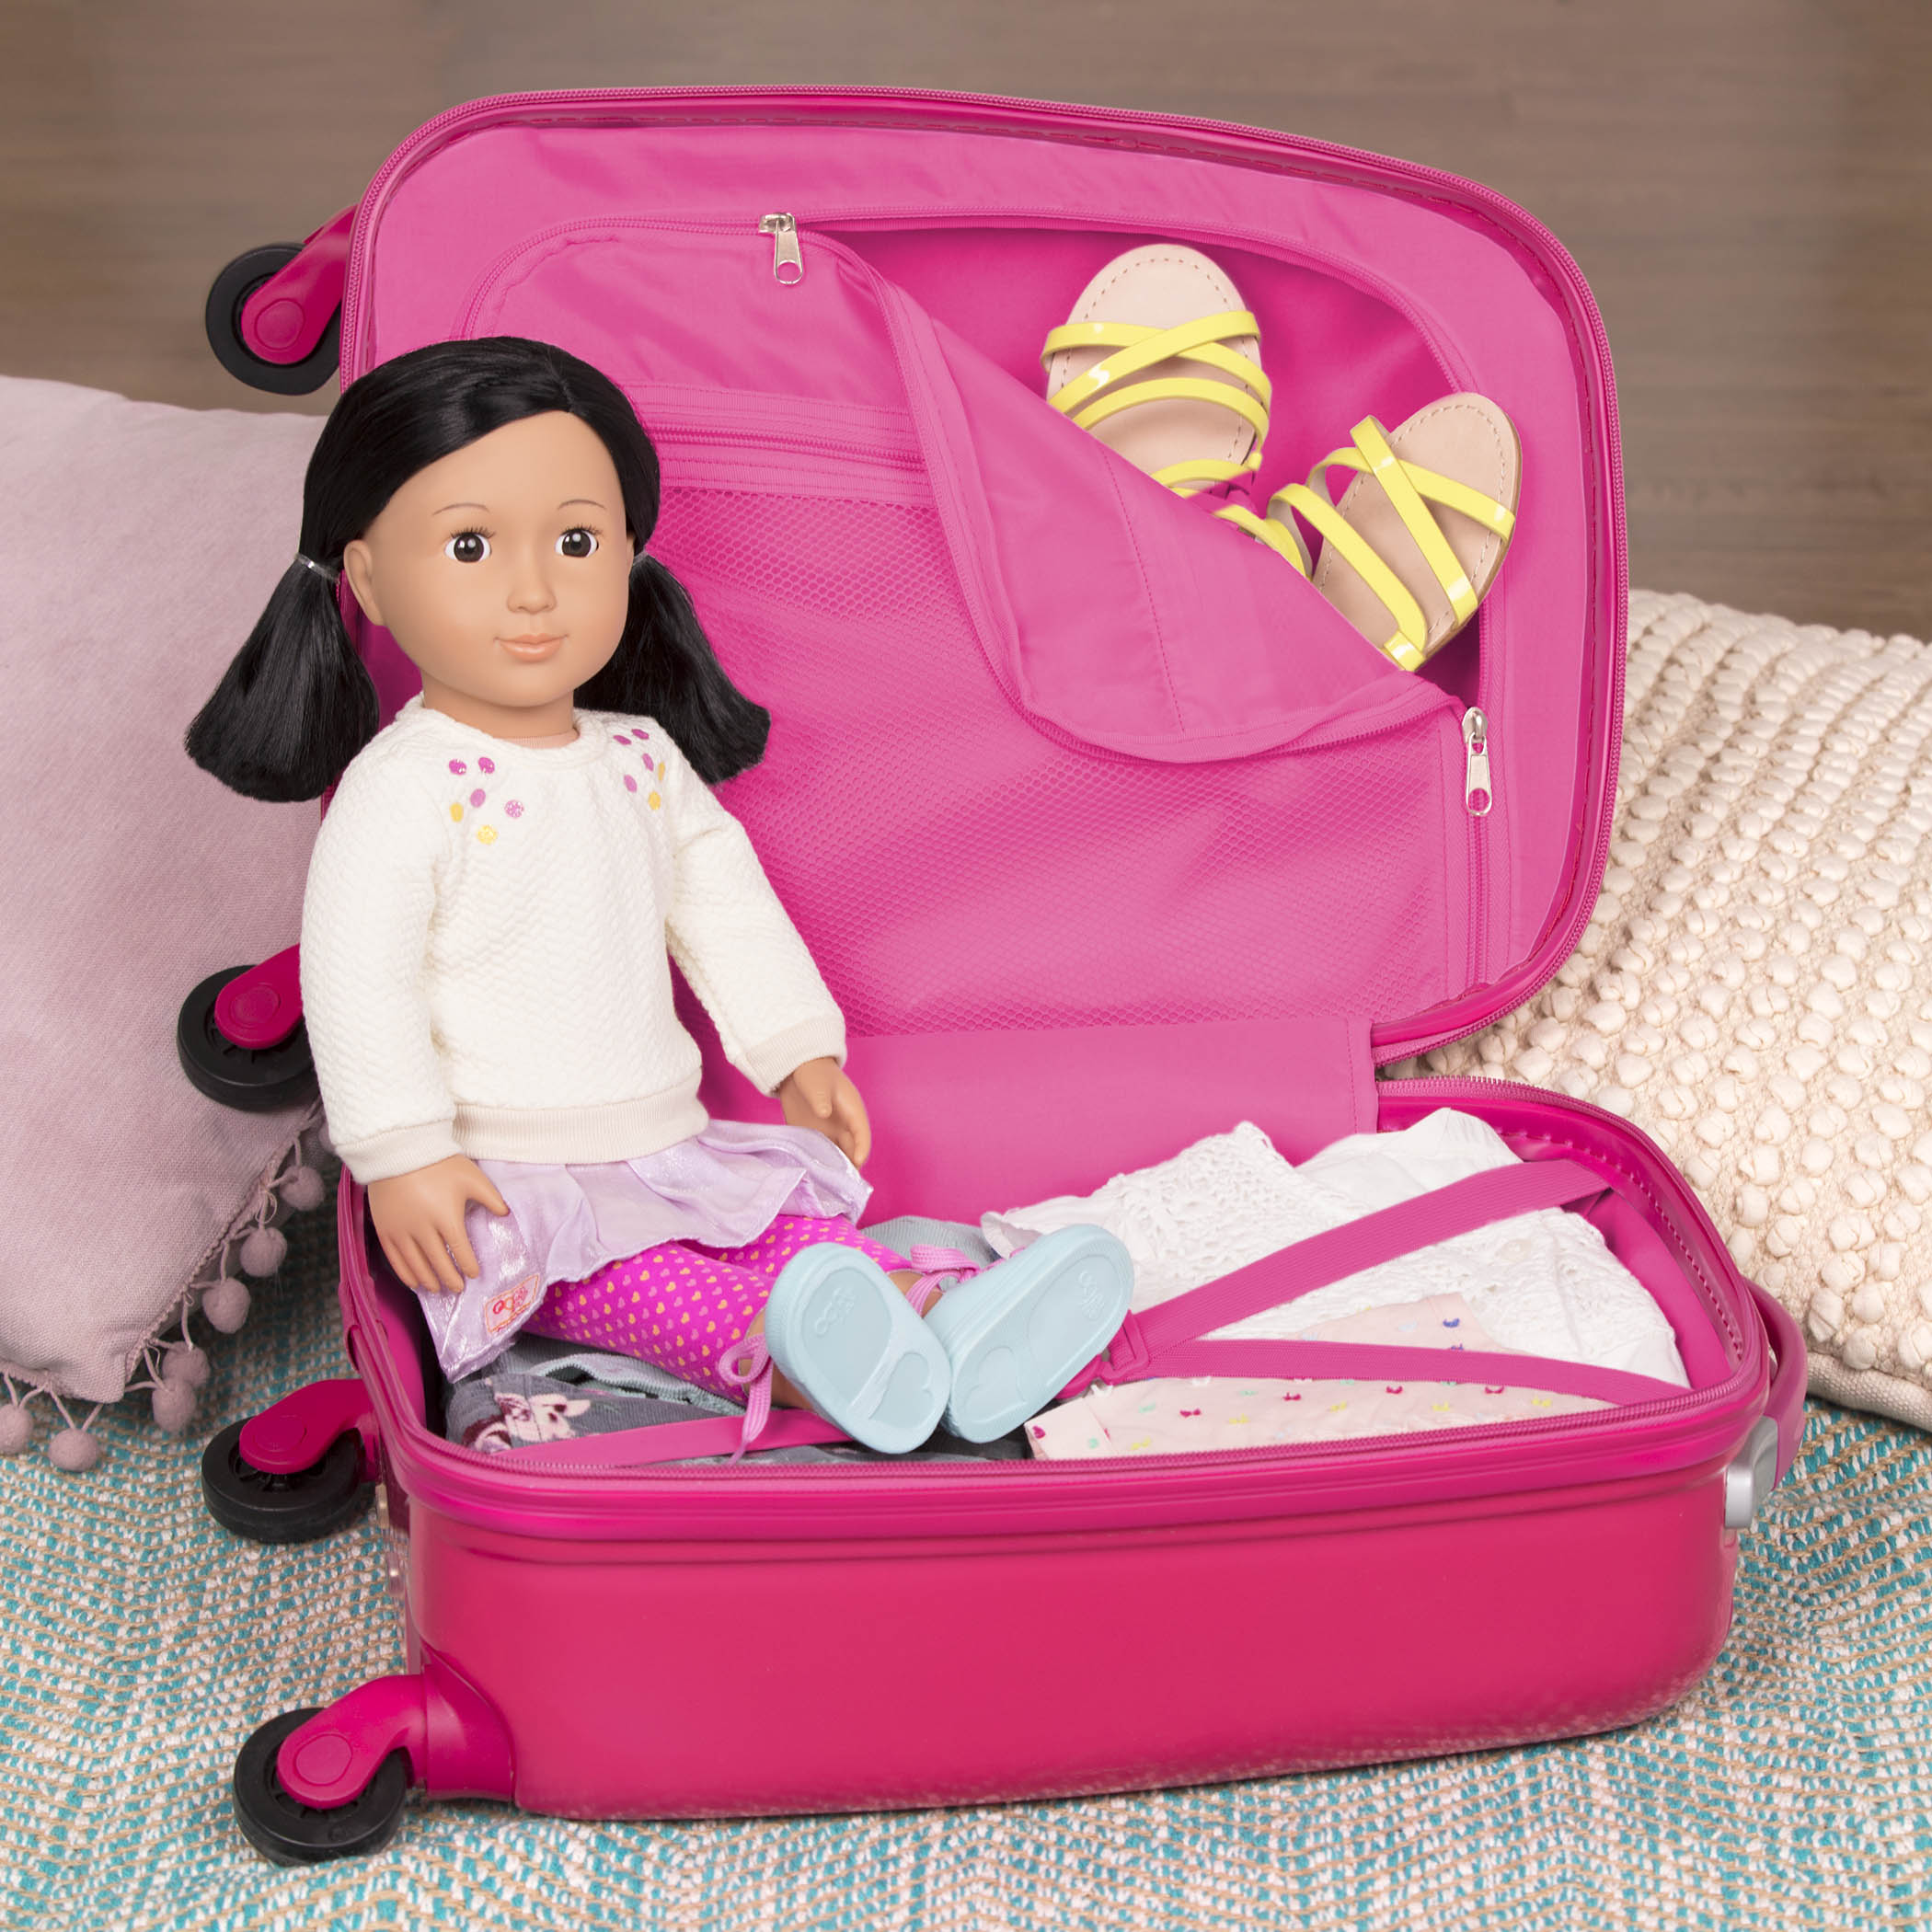 Carry On Dreaming with Suyin doll inside